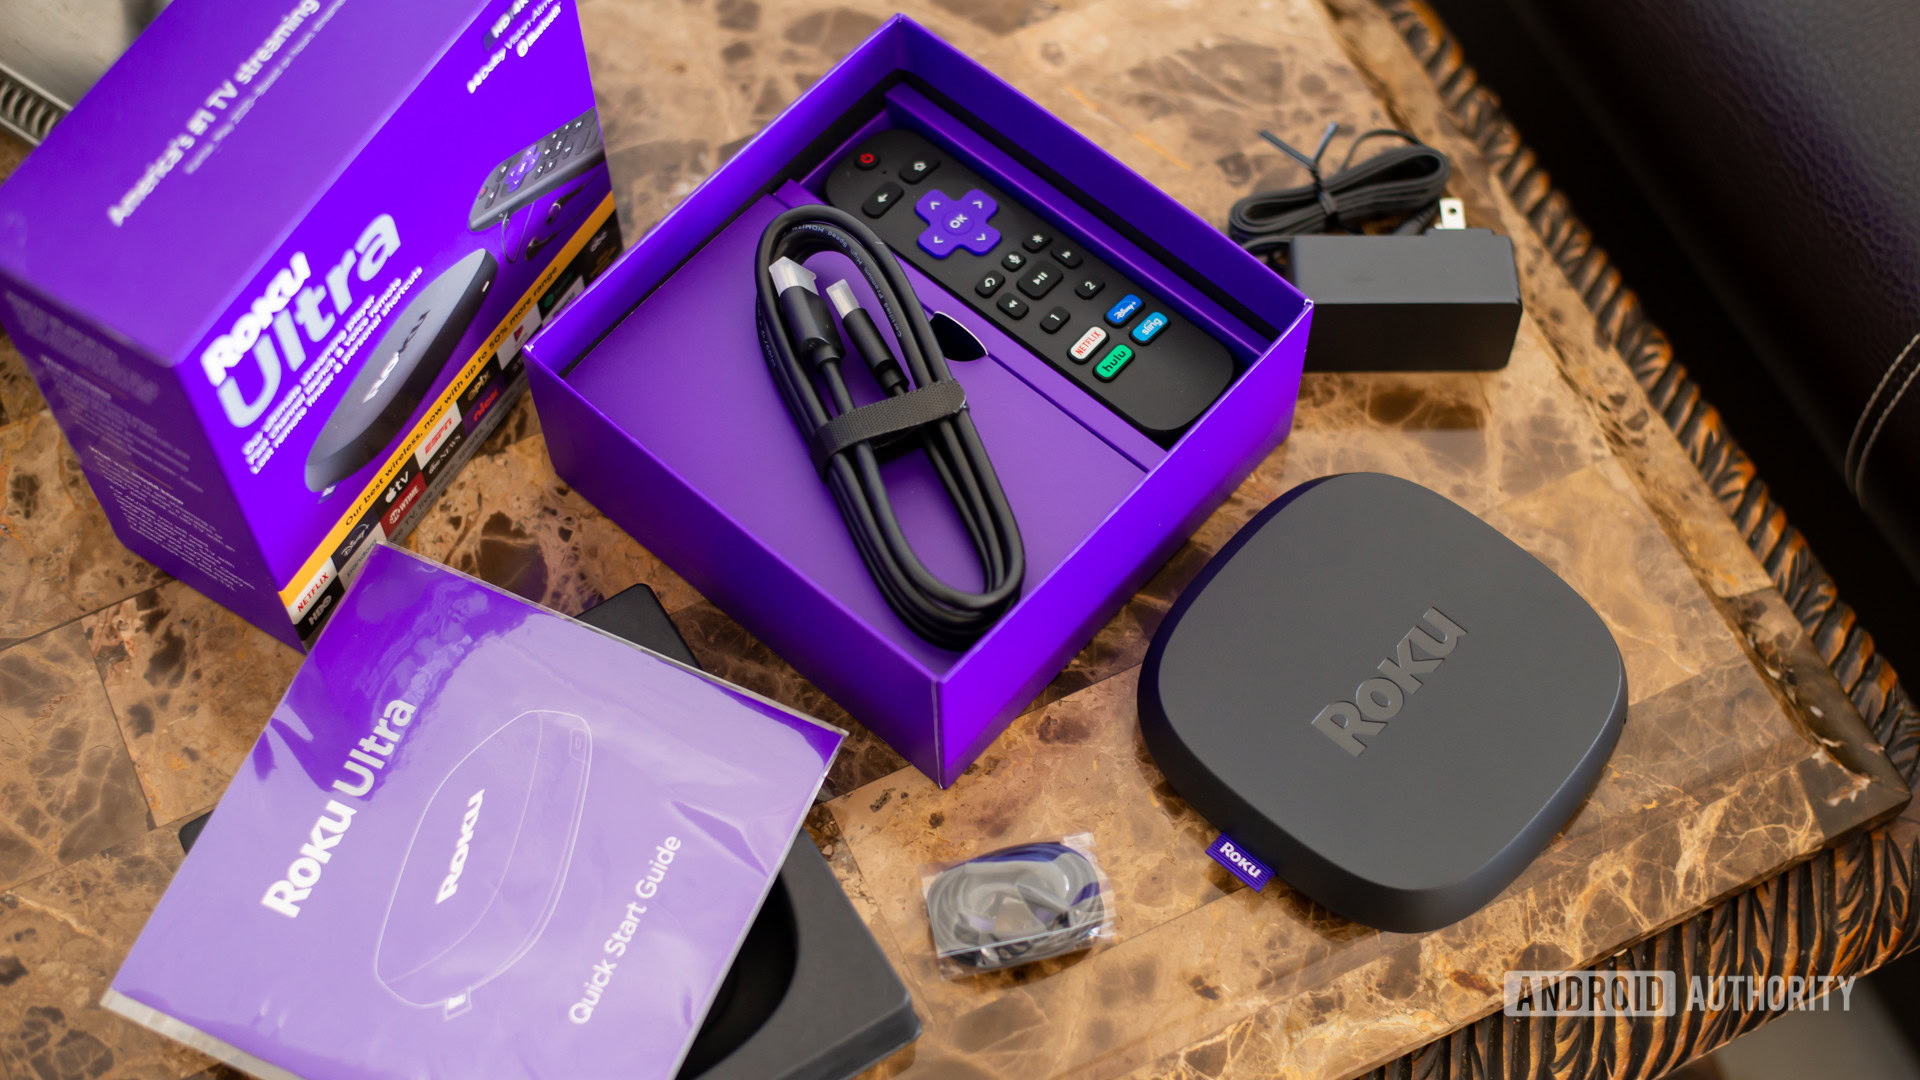 Roku Accessories, Streaming Accessories for Roku Devices & TVs